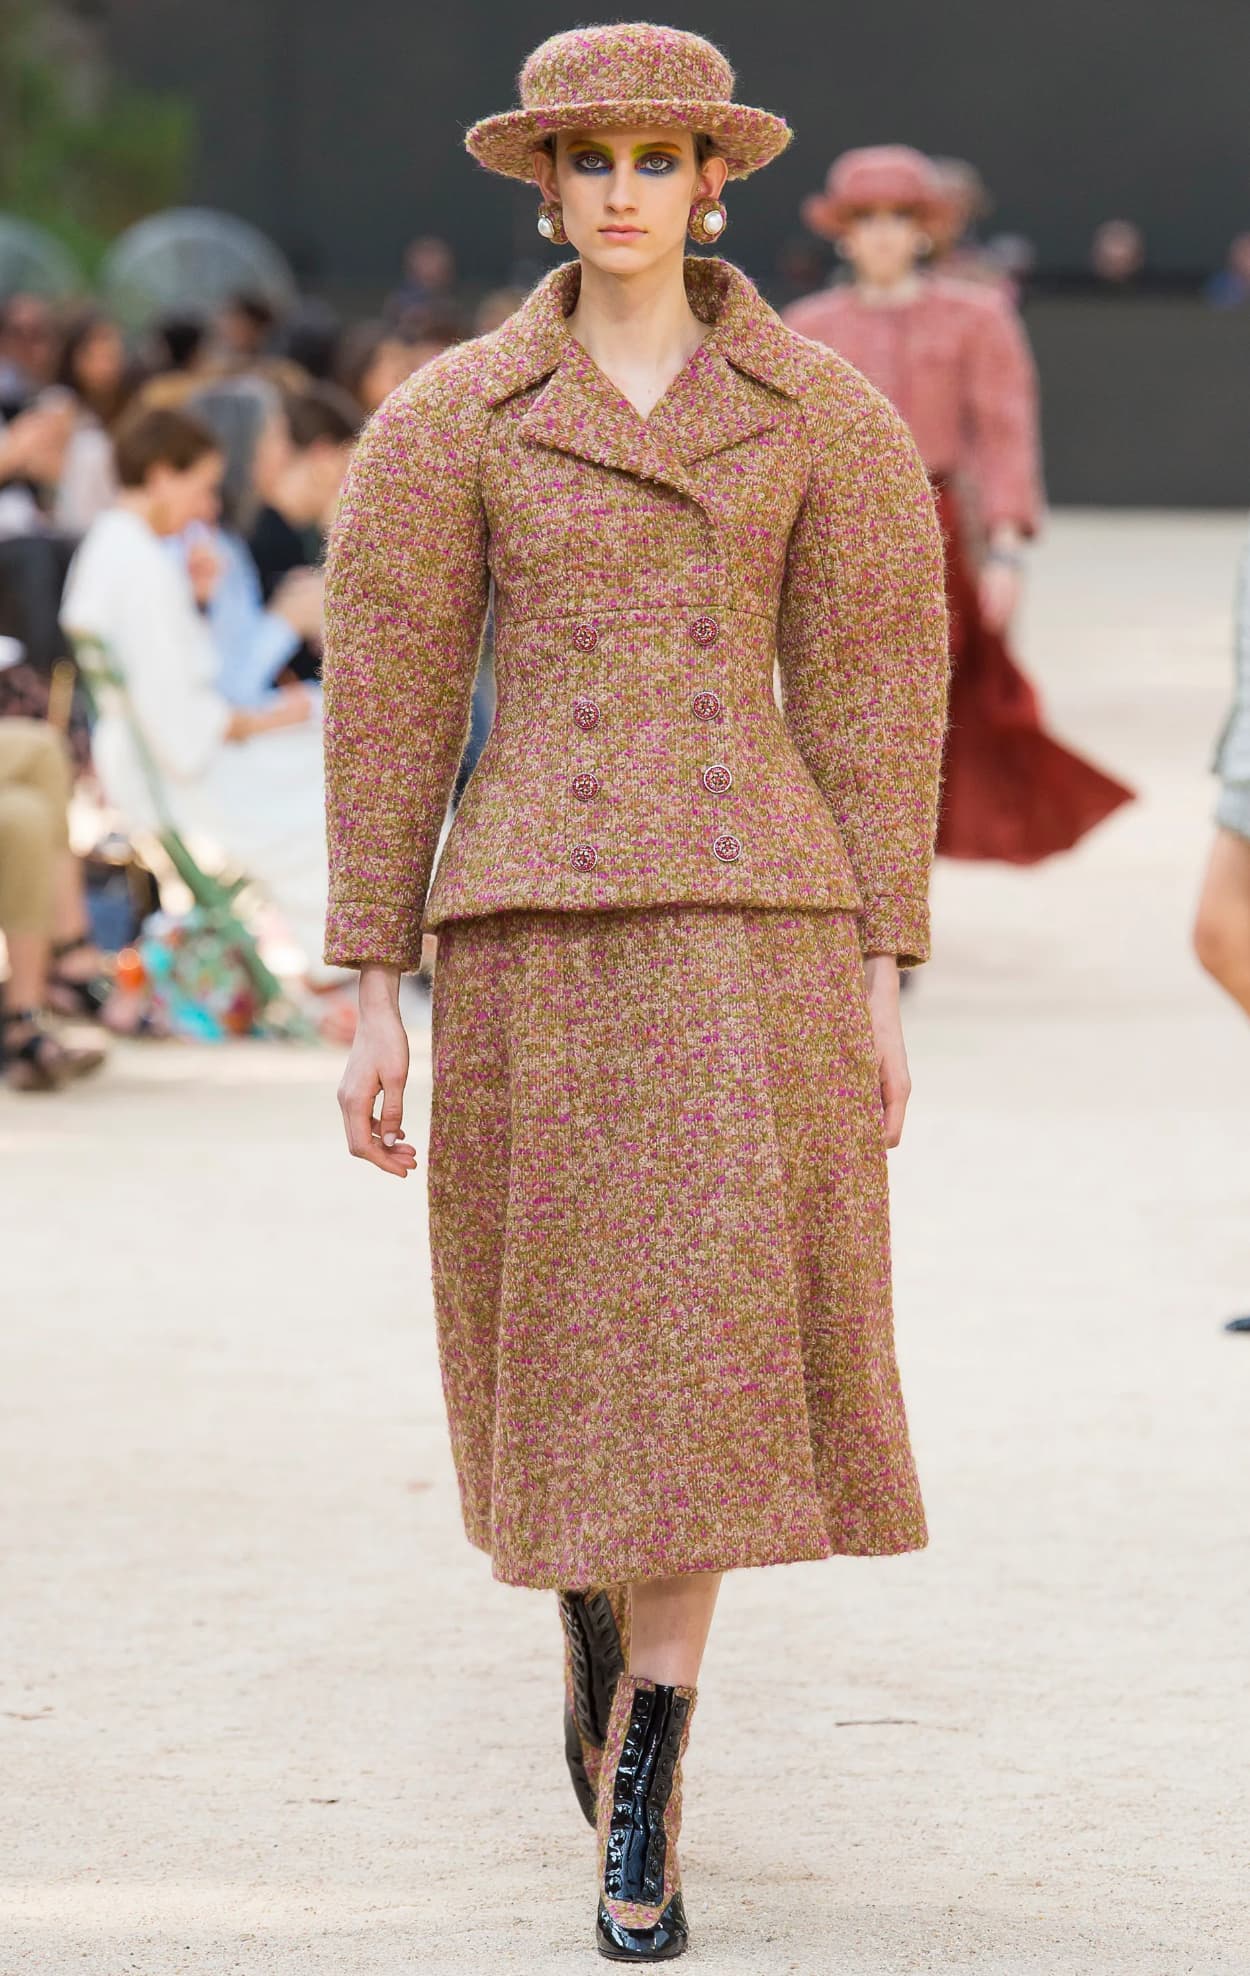 Chanel Spring 2021 Haute Couture Fashion Show Review | The Impression